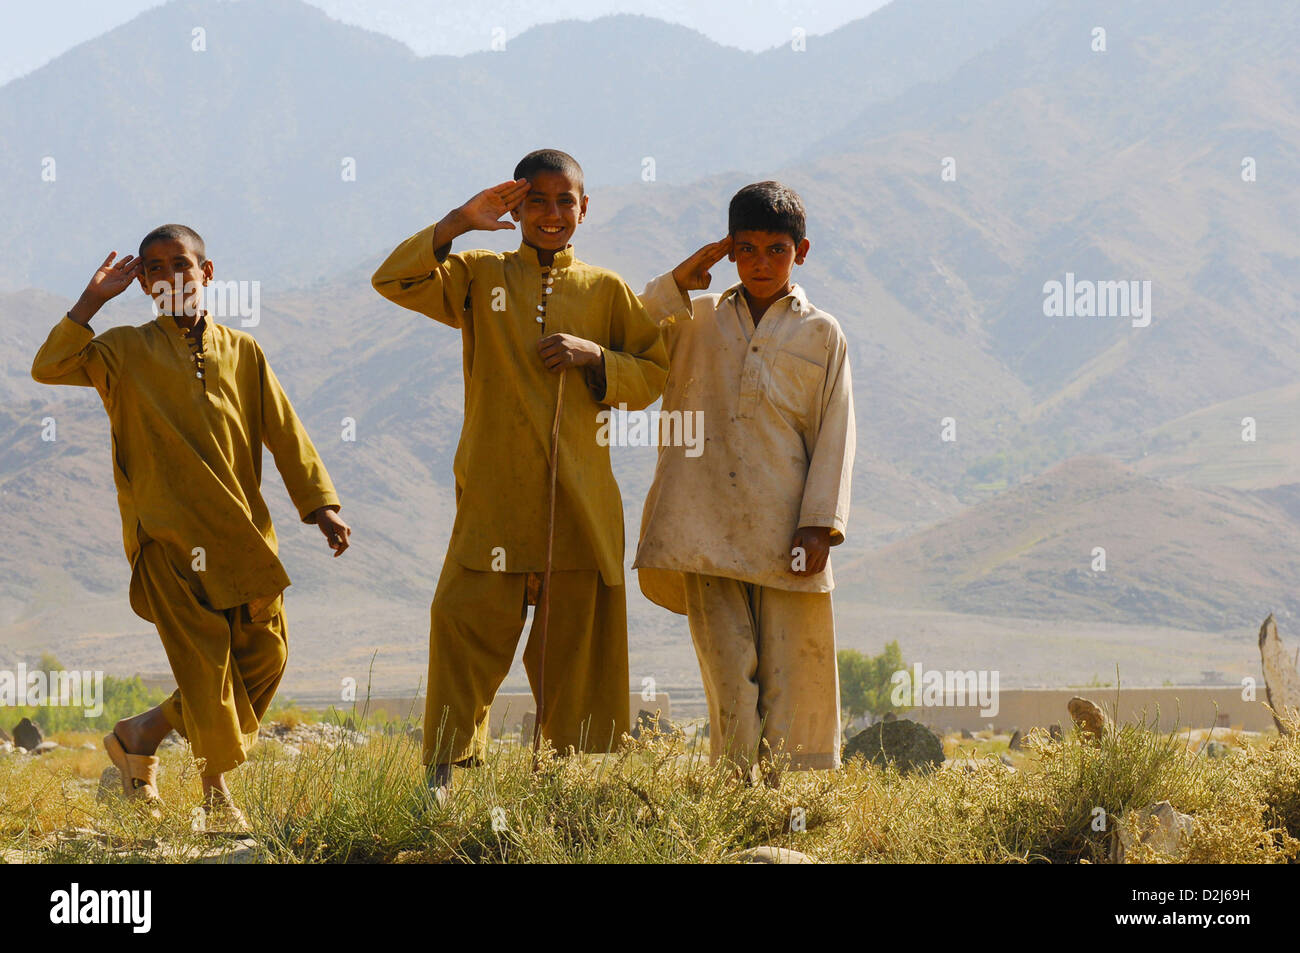 Afghan children salute the US Soldiers and Sailors from the side of the Nowabad-Khas Kunar Road in Afghanistan October 31, 2010. The road, which was built over the course of the previous year was officially opened during a ribbon-cutting ceremony earlier that day. Stock Photo